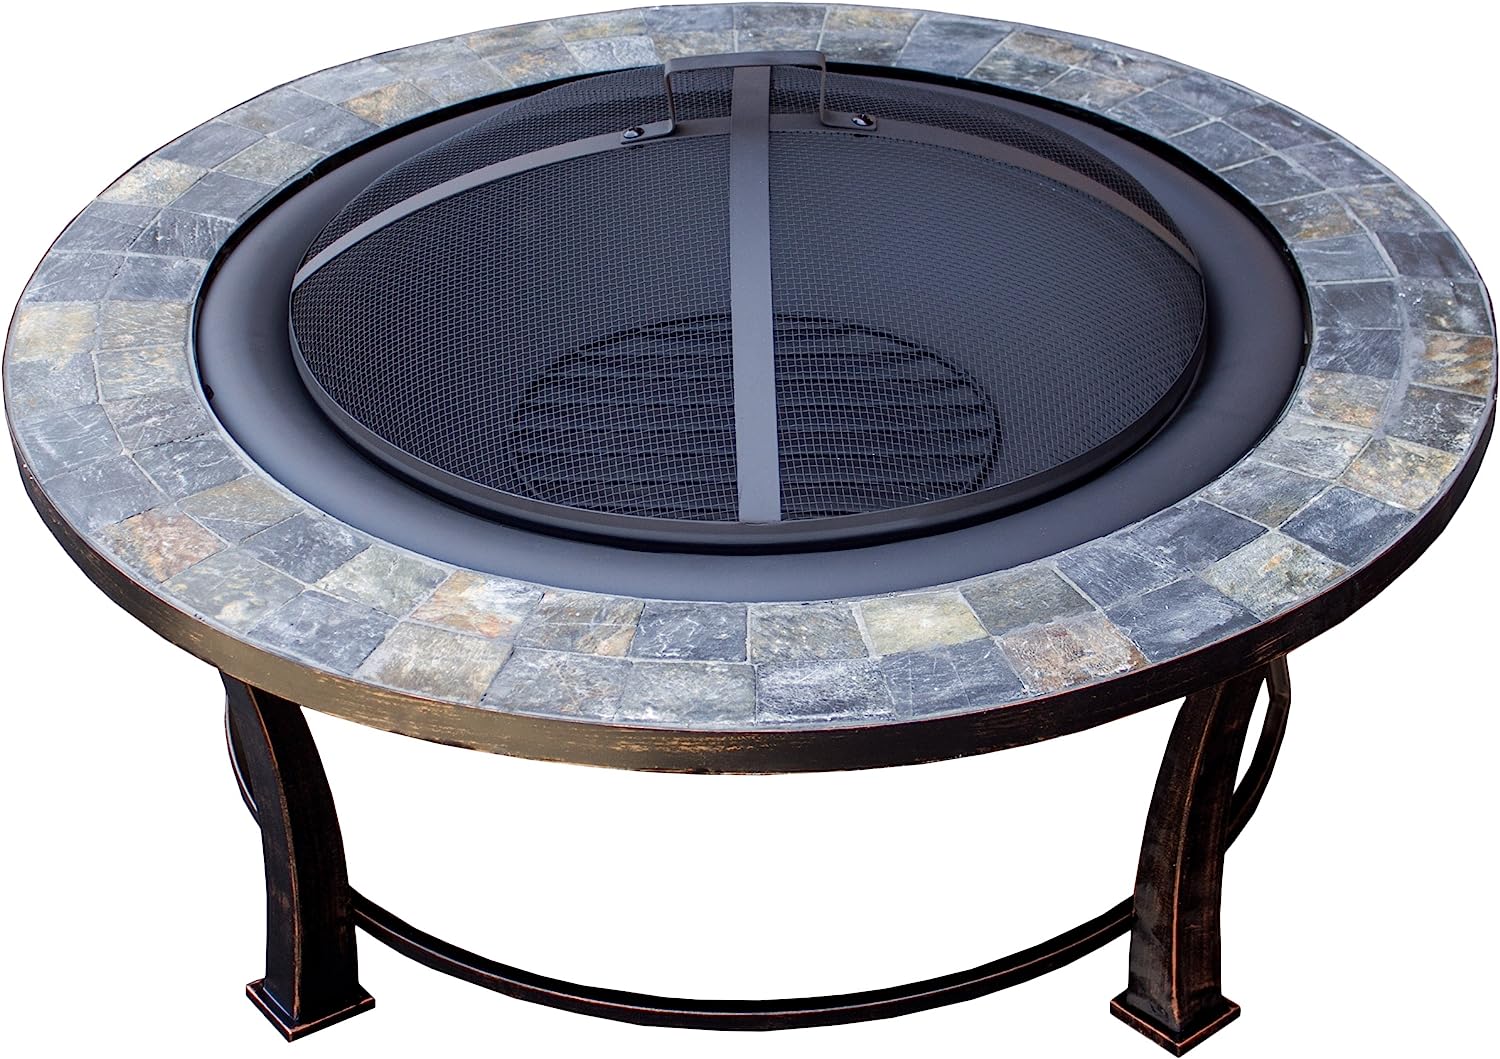 Hiland FT-51216 Burning Fire Pit w/Wood Grate and Domed Mesh Screen Lid, Medium, Stone